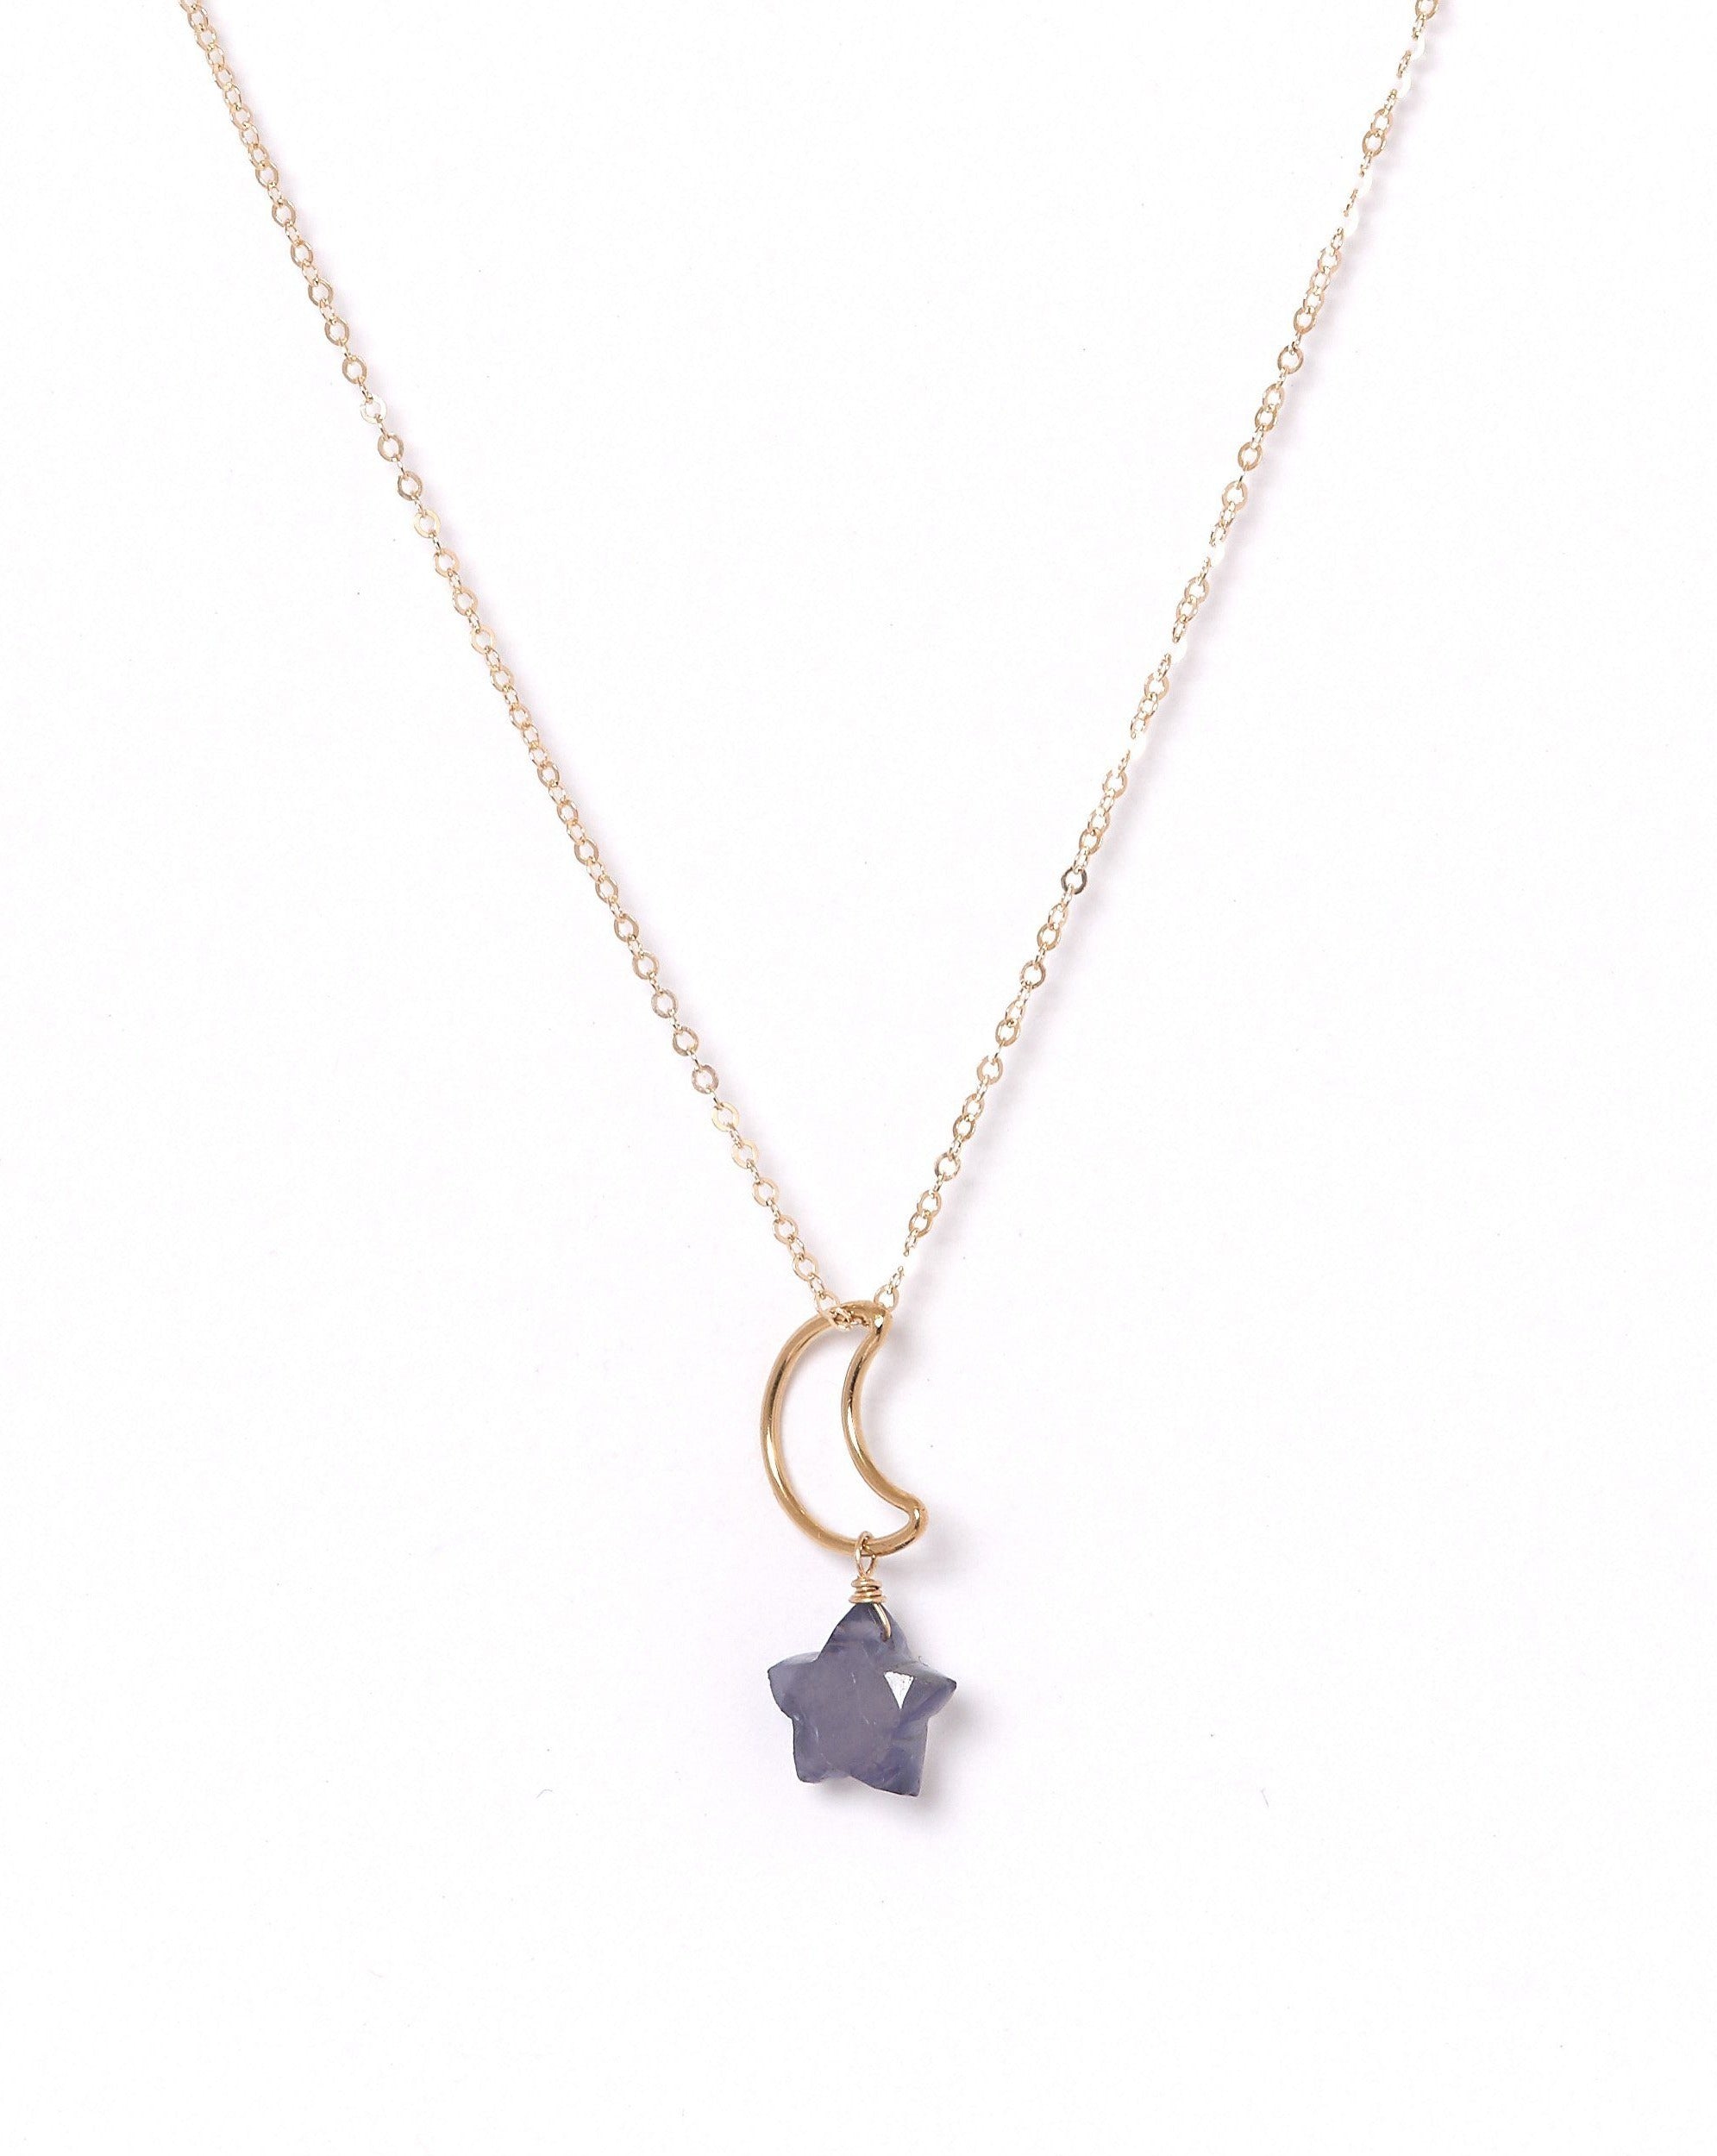 Lunastar Necklace by KOZAKH. A 16 to 18 inch adjustable length necklace, crafted in 14K Gold Filled, featuring a 13mm moon charm and an Iolite star charm.